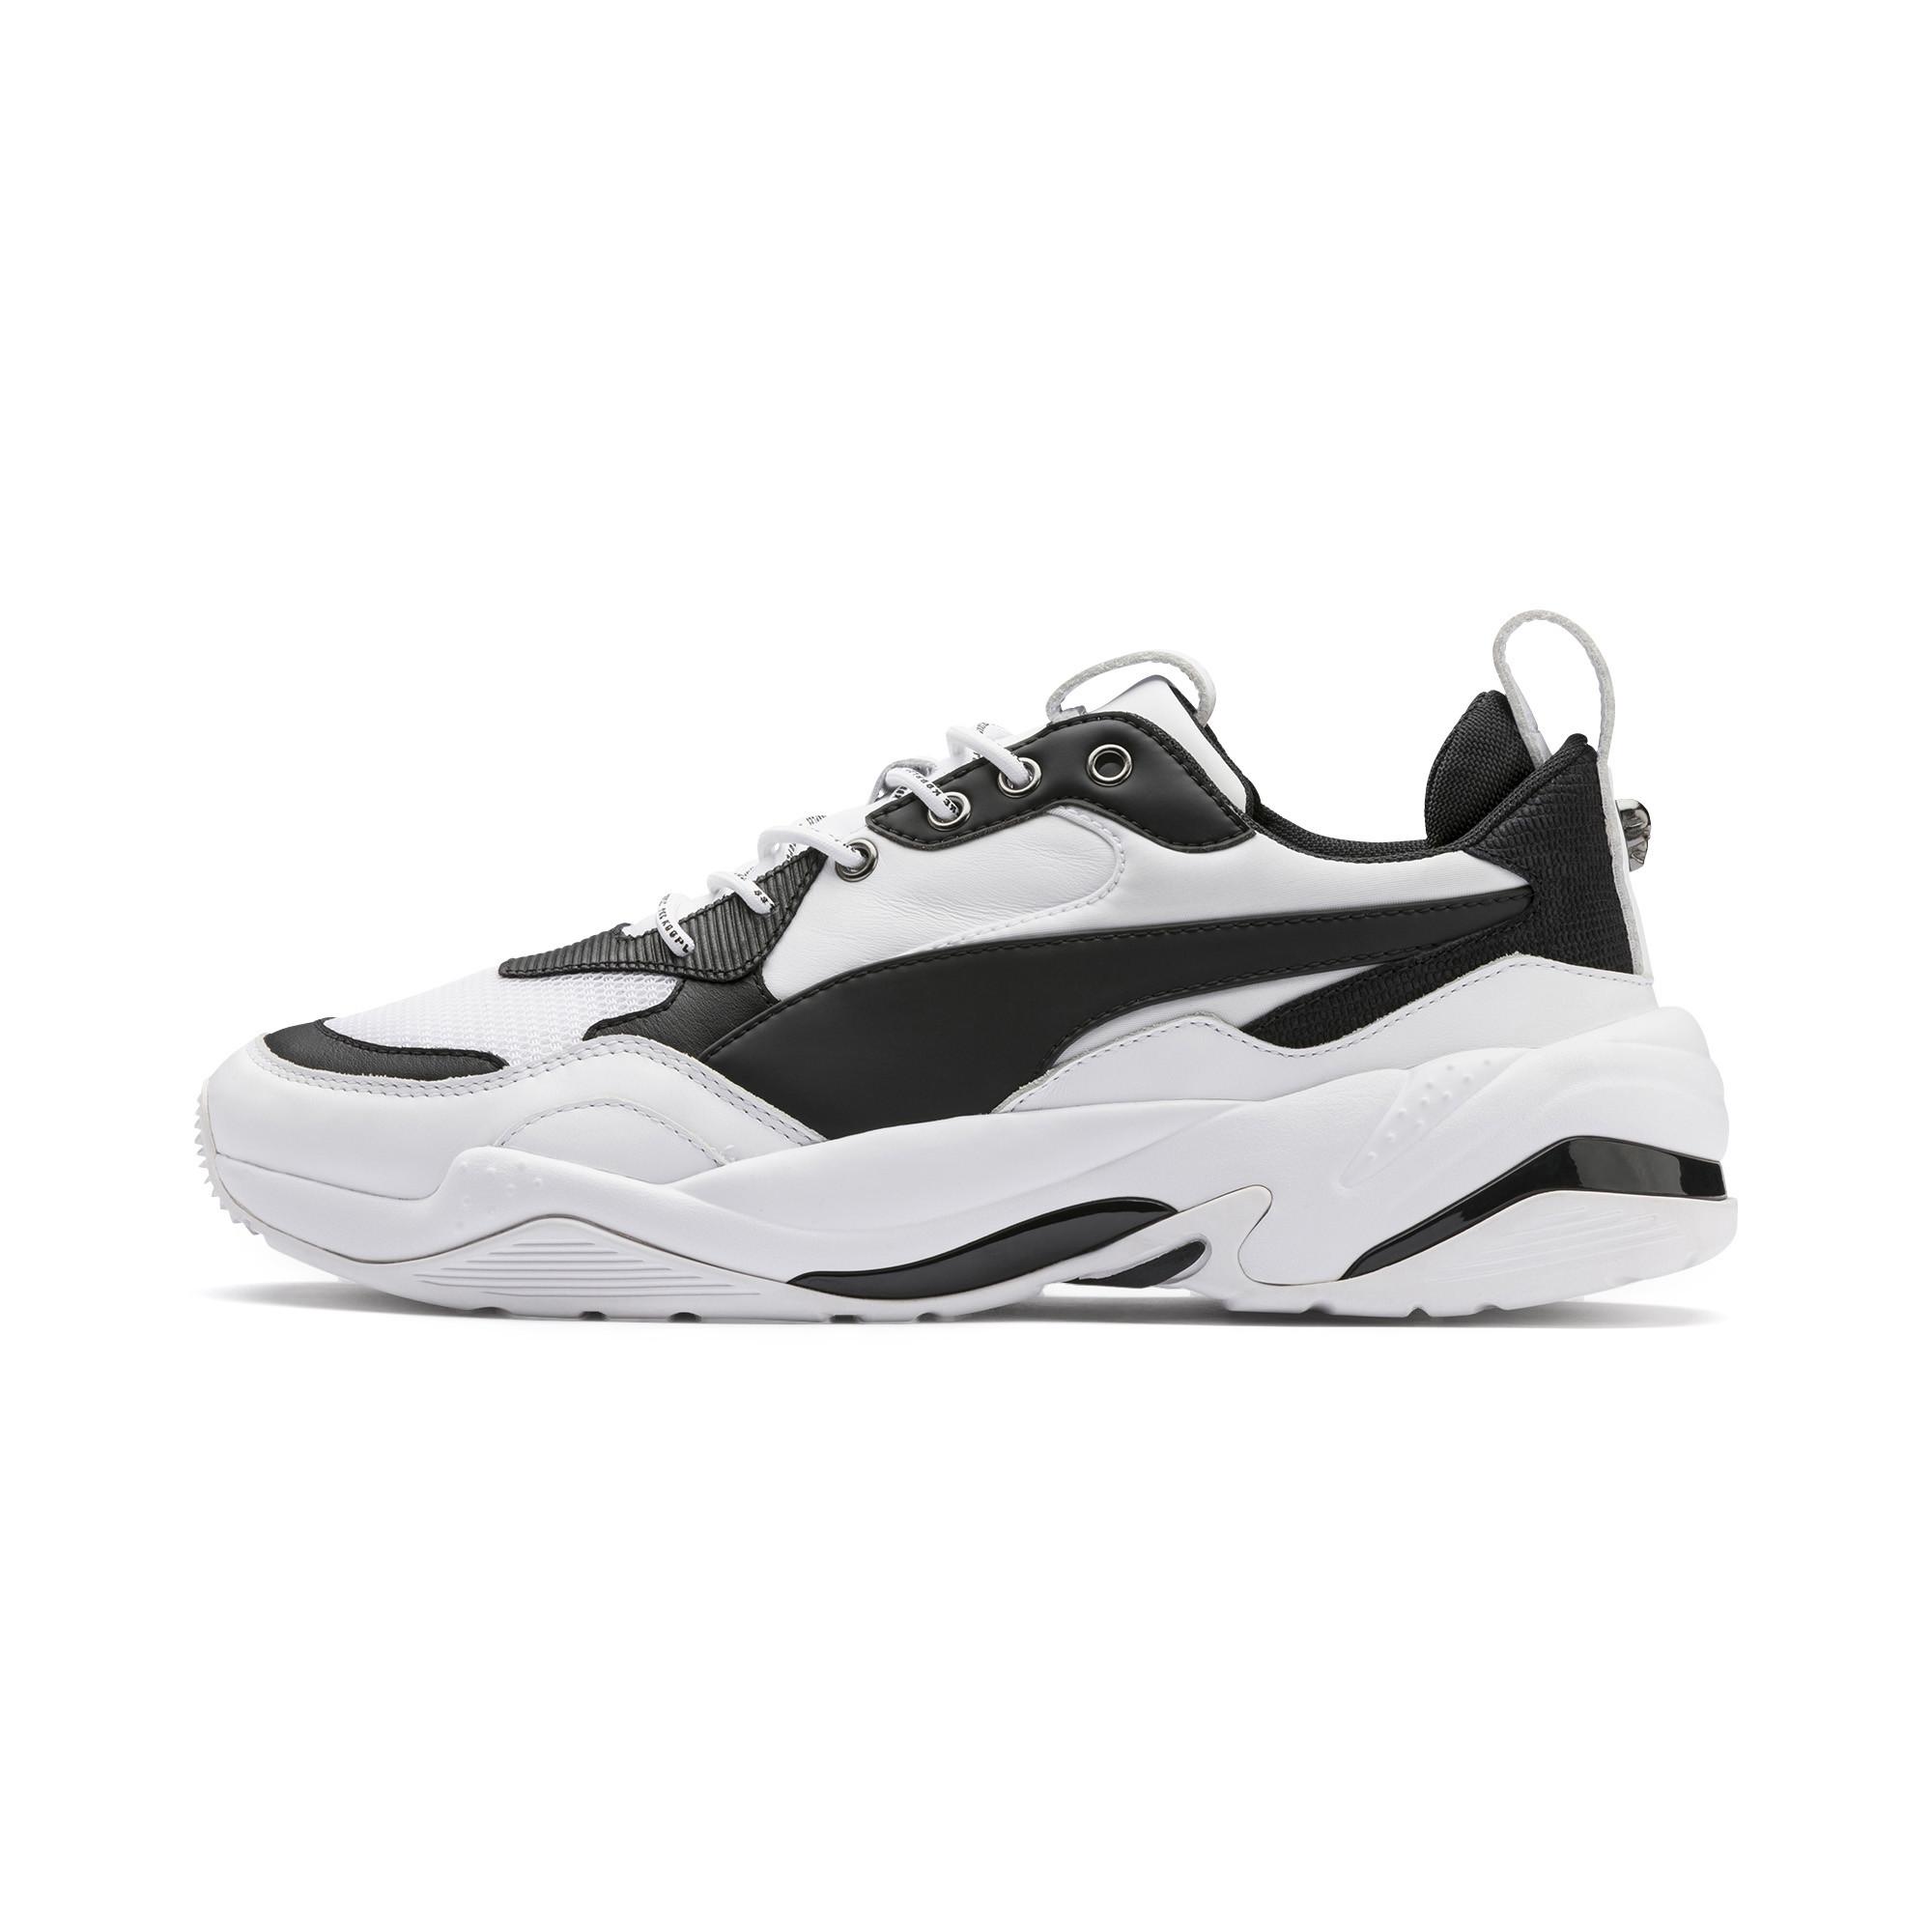 PUMA Synthetic X The Kooples Thunder Sneakers in White for Men - Lyst